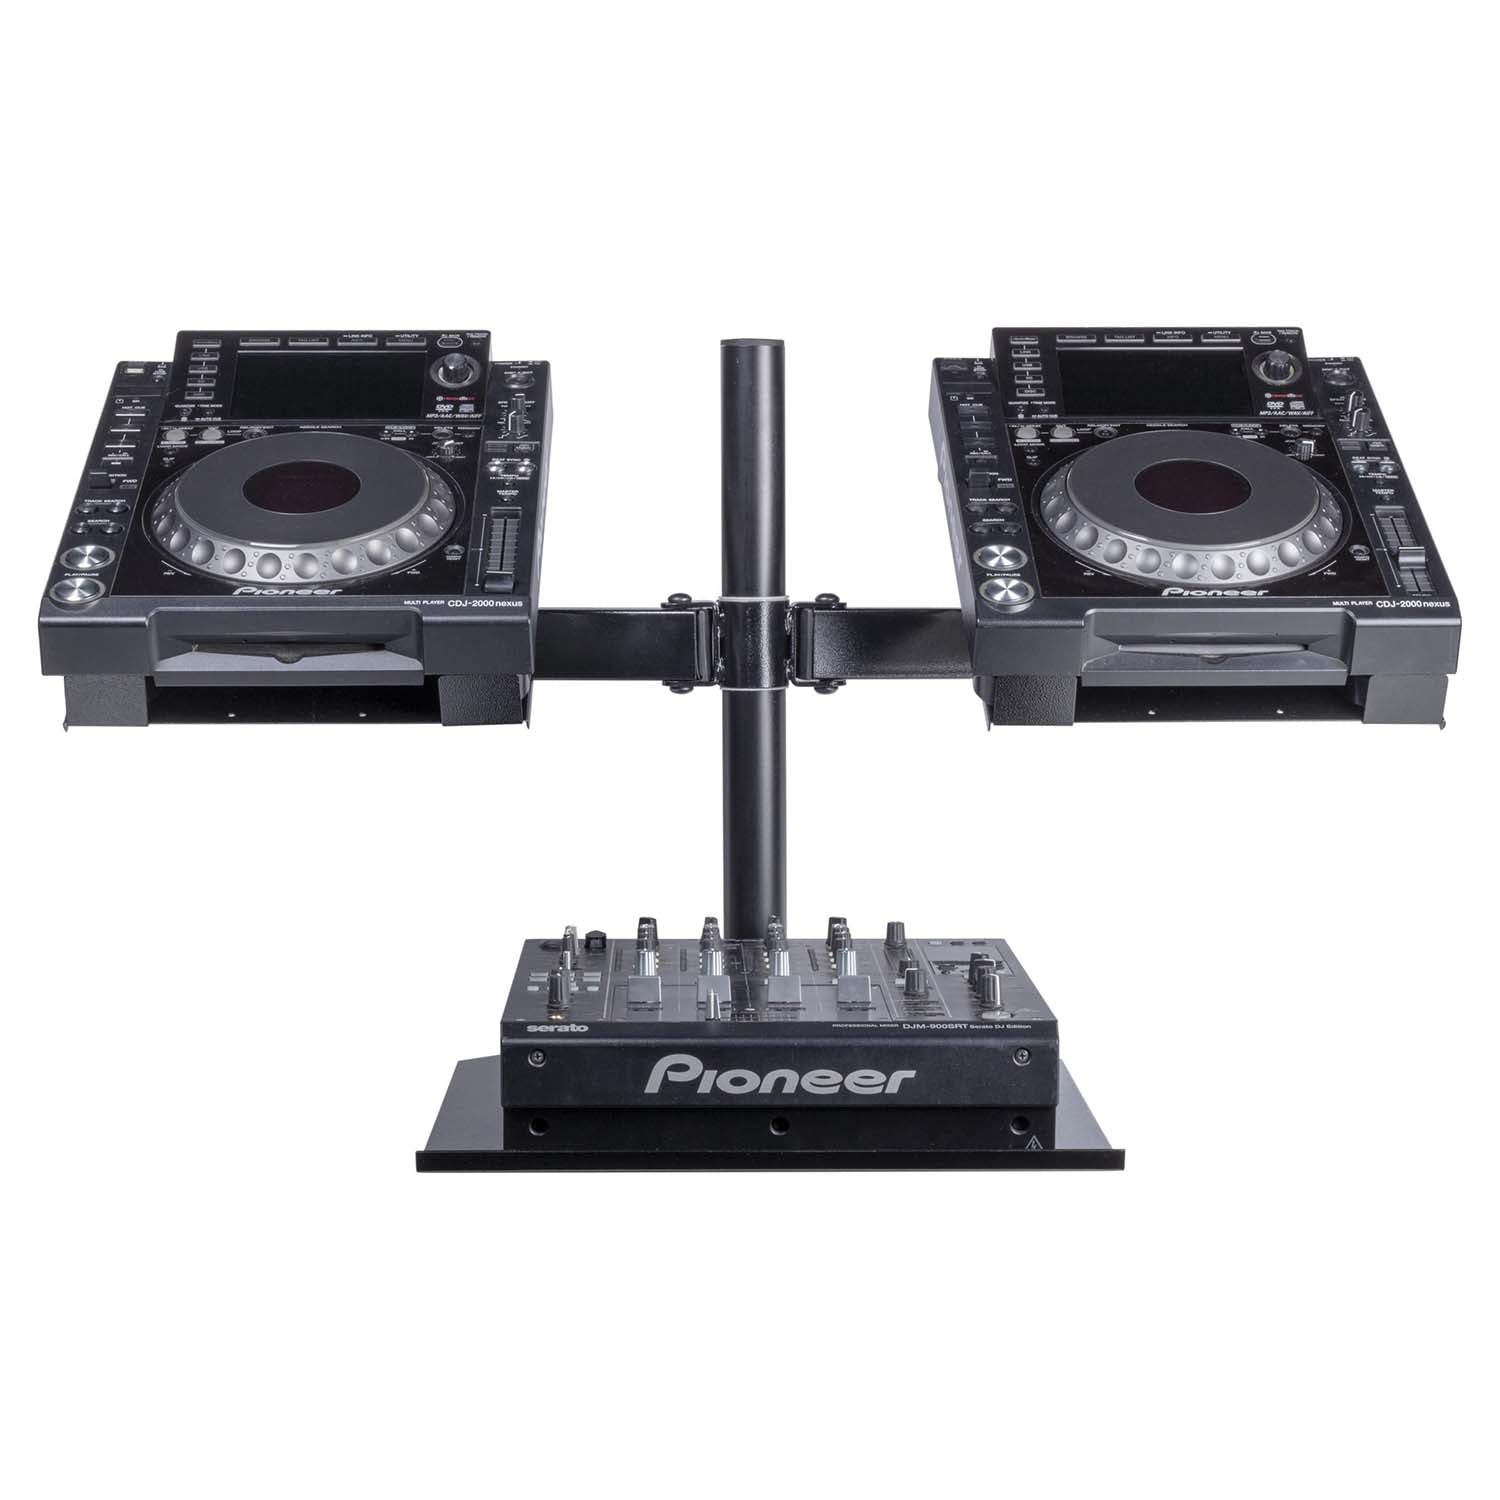 Headliner HL22000 Avalon CDJ Stand With Independently Adjustable Twin Arms - Hollywood DJ